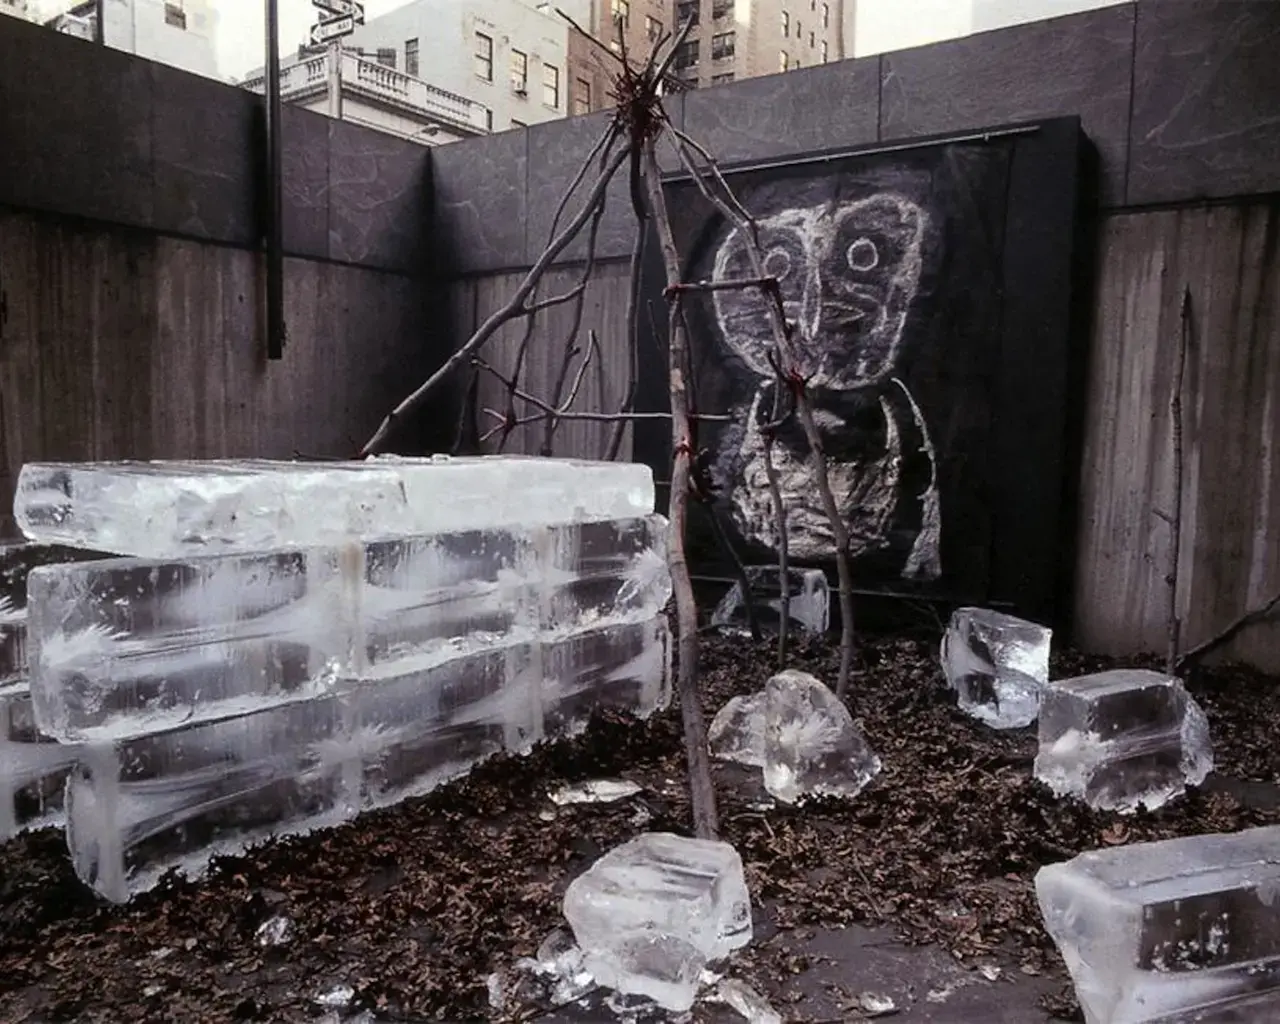 Rafael Ferrer, Fuegian House with Harpy Eagle, leaves, ice, tarp, branches, paint, Whitney Museum of American Art south moat, New York. Installation during Ferrer&rsquo;&#39; one-person exhibit, December 9, 1971 to January 9, 1972. Brochure by Marcia Tucker.